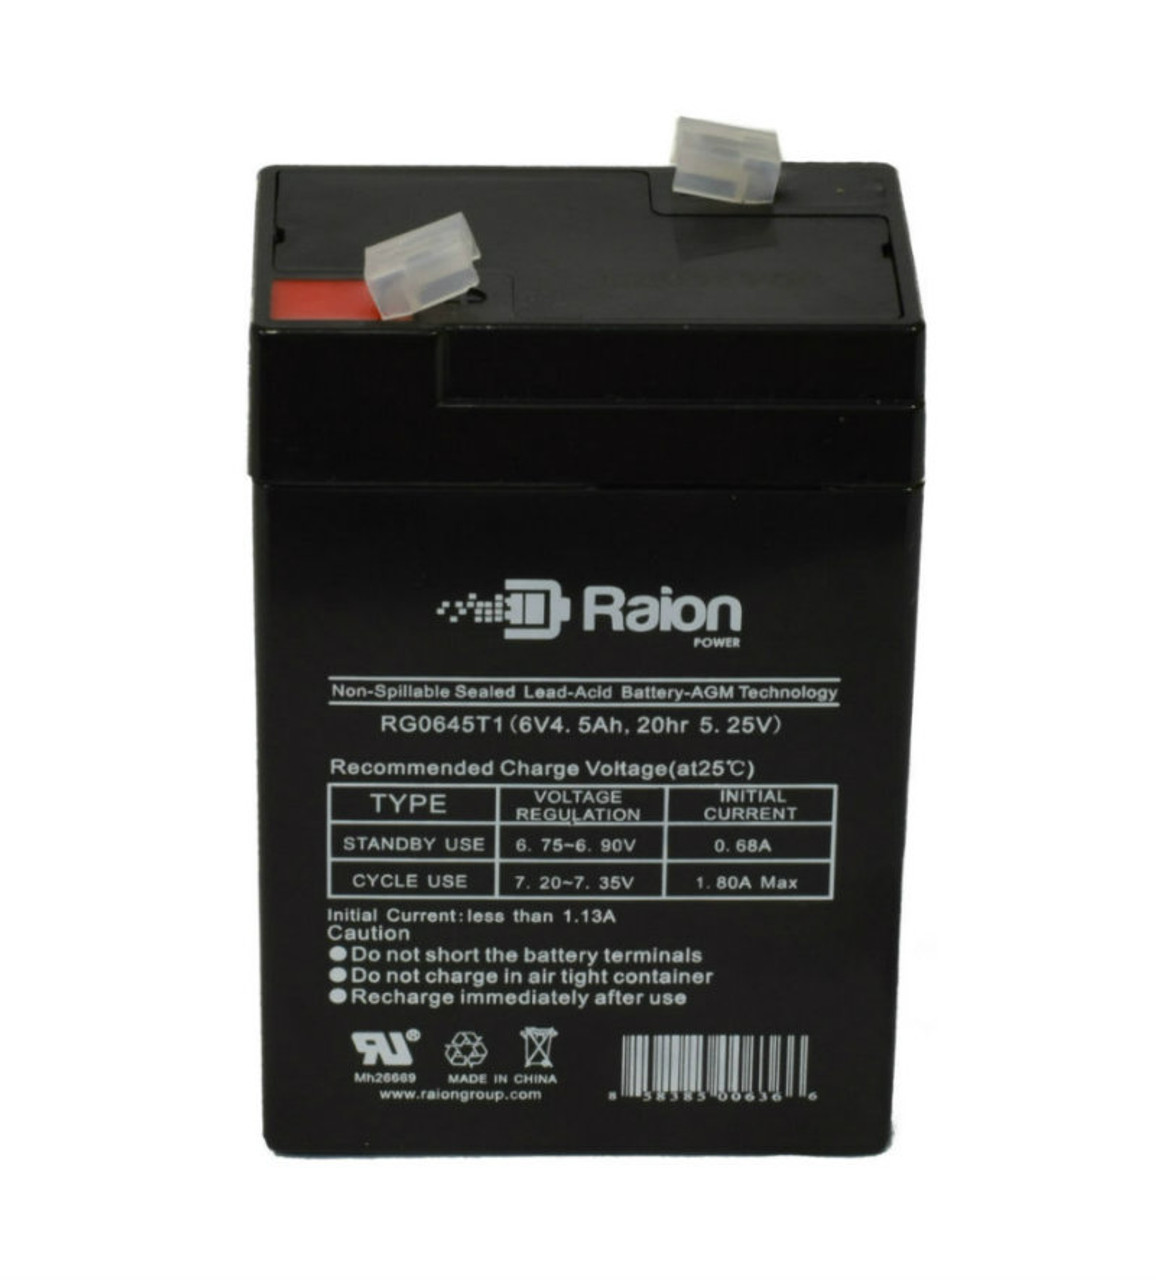 Raion Power RG0645T1 Replacement Battery Cartridge for Mule PM645